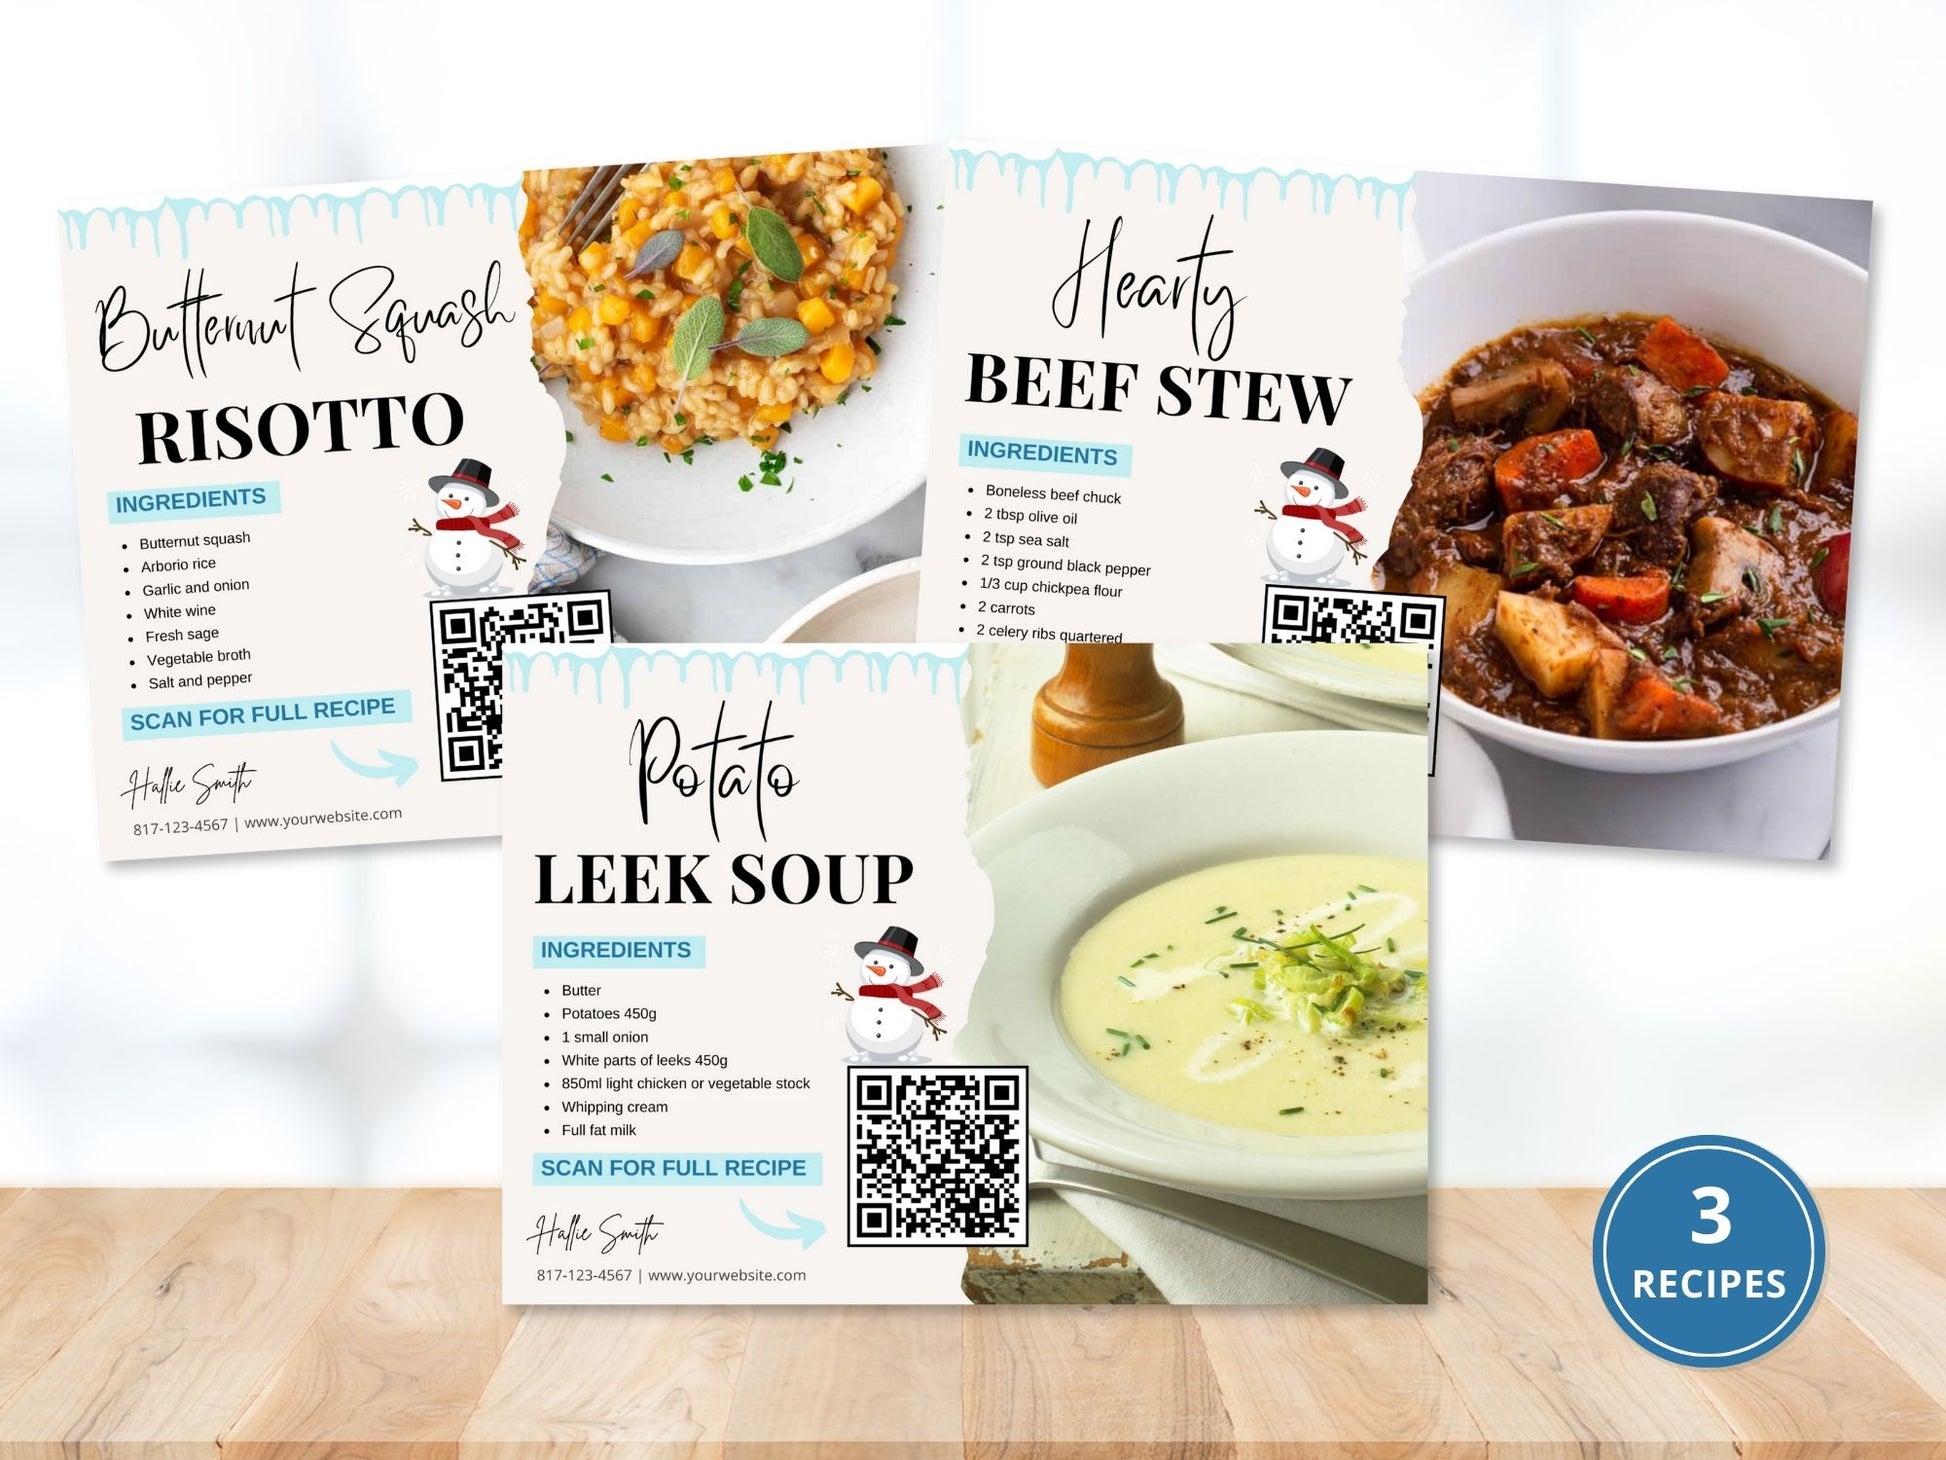 Real Estate Winter Recipe Postcard Bundle: Sharing Seasonal Warmth and Culinary Delights with Clients and Prospects